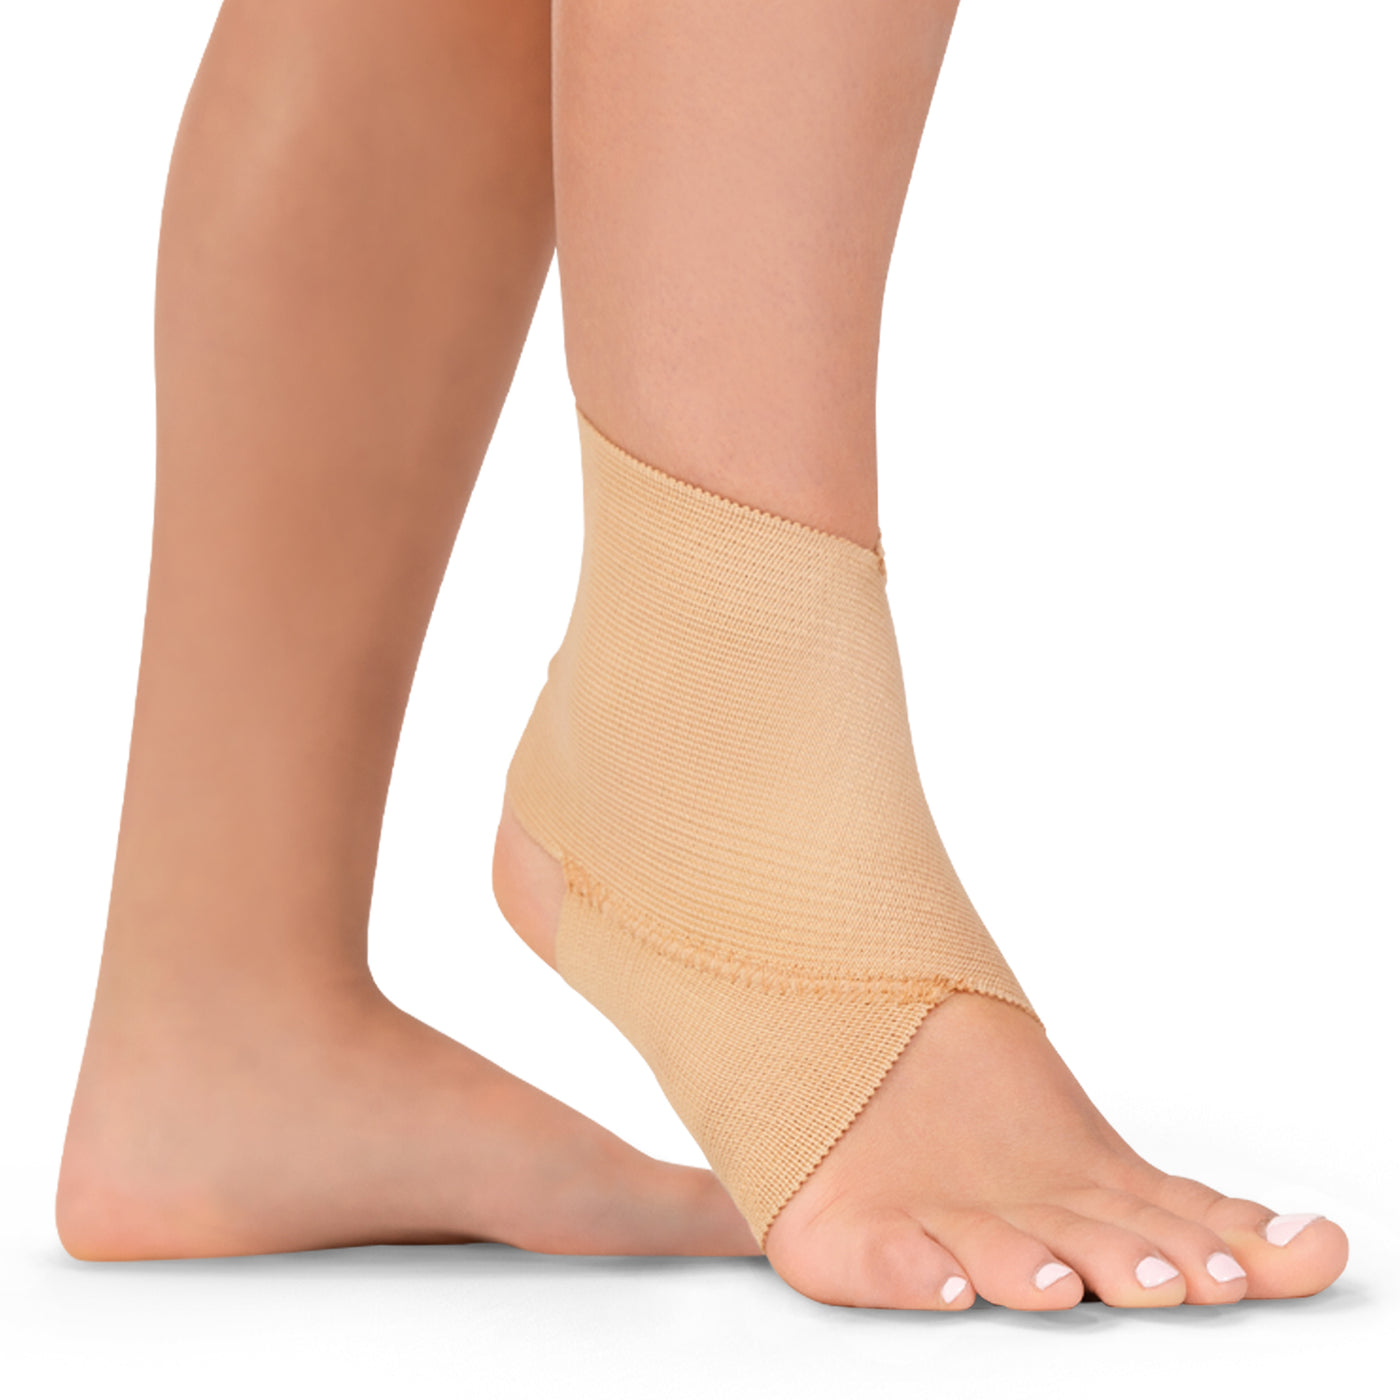 Rite Aid Compression Ankle Support, Size S/M - Pack of 1